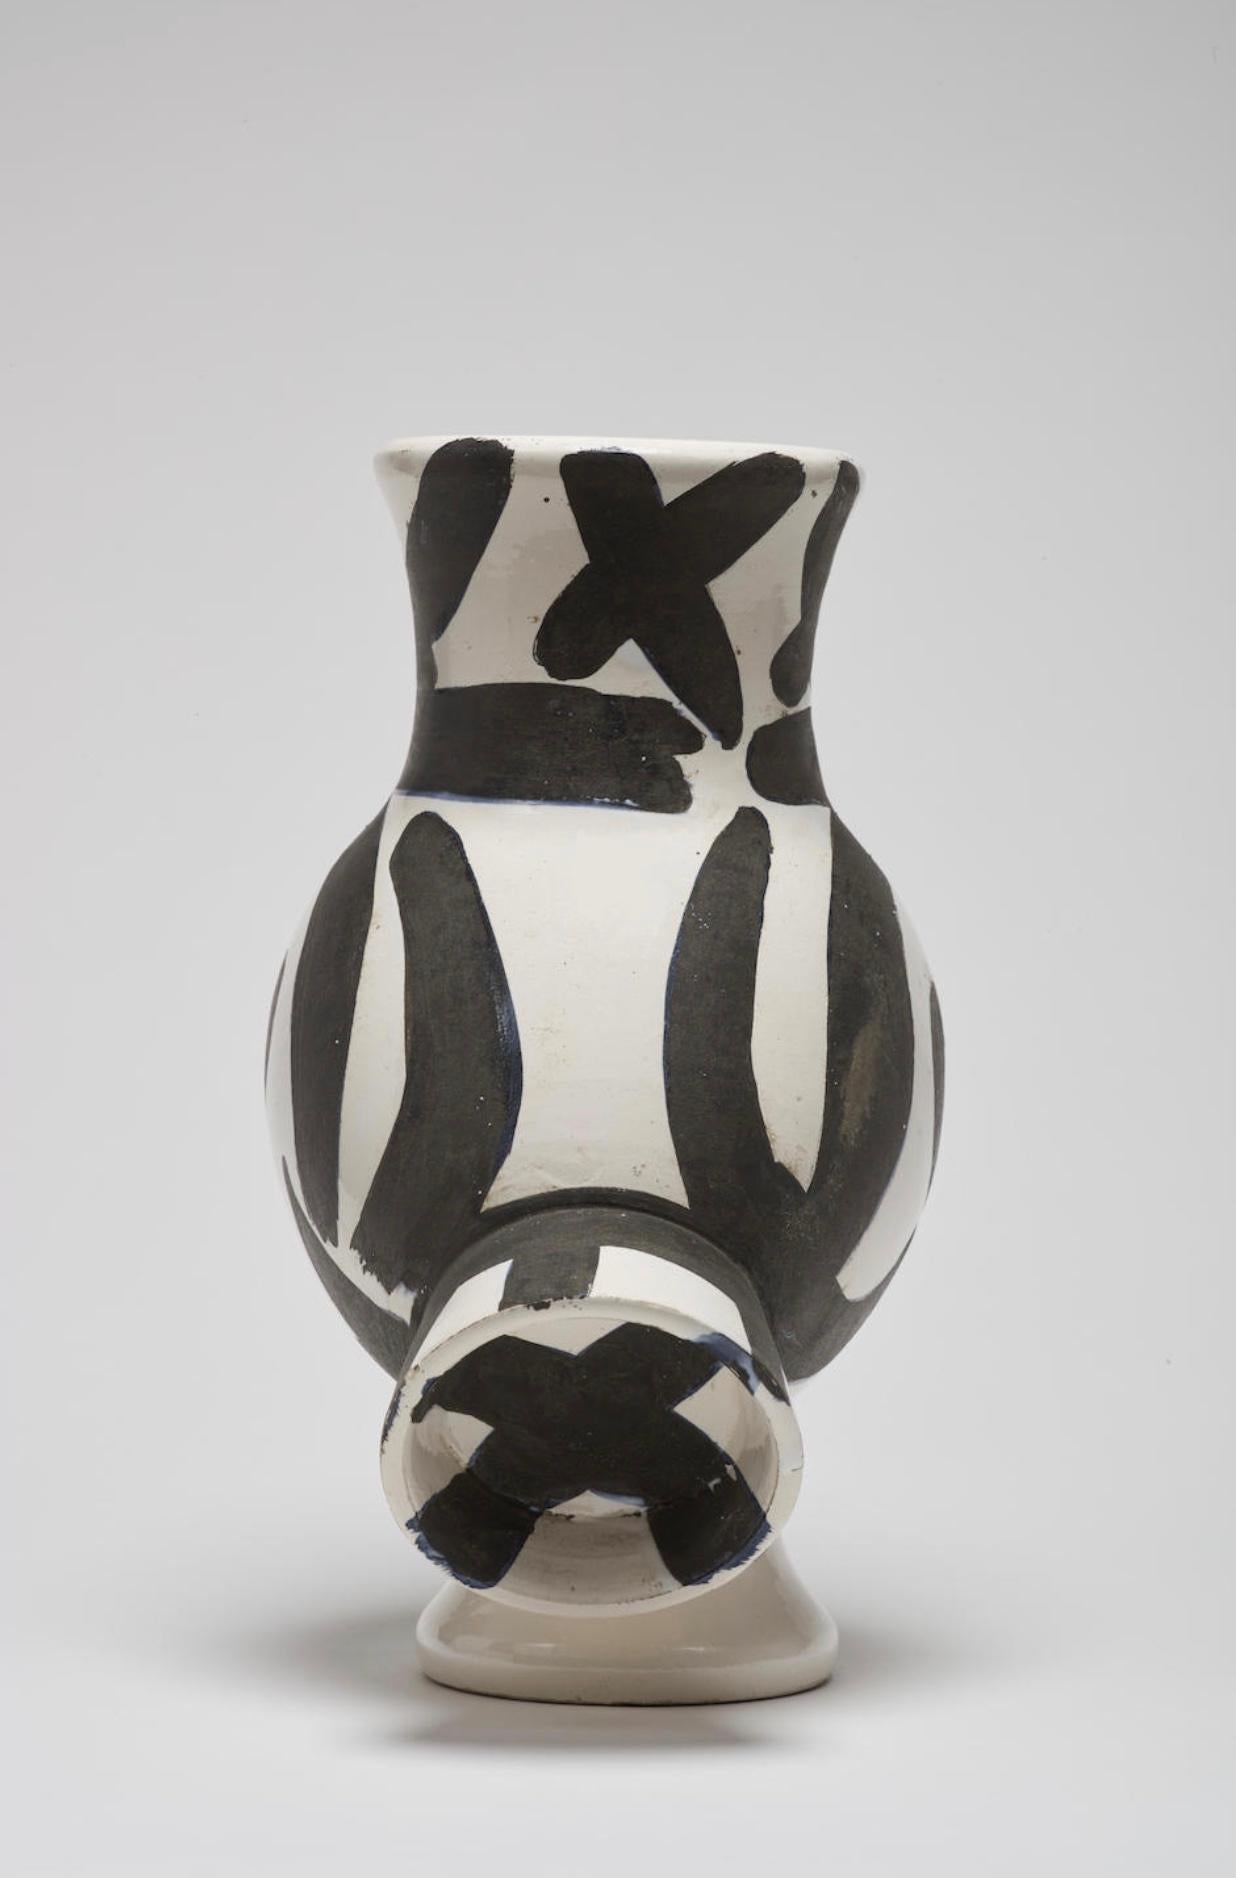 Chouette, Picasso, Pitcher, Design, 1950's, Ceramic, Black and white, Animal - Post-War Sculpture by Pablo Picasso